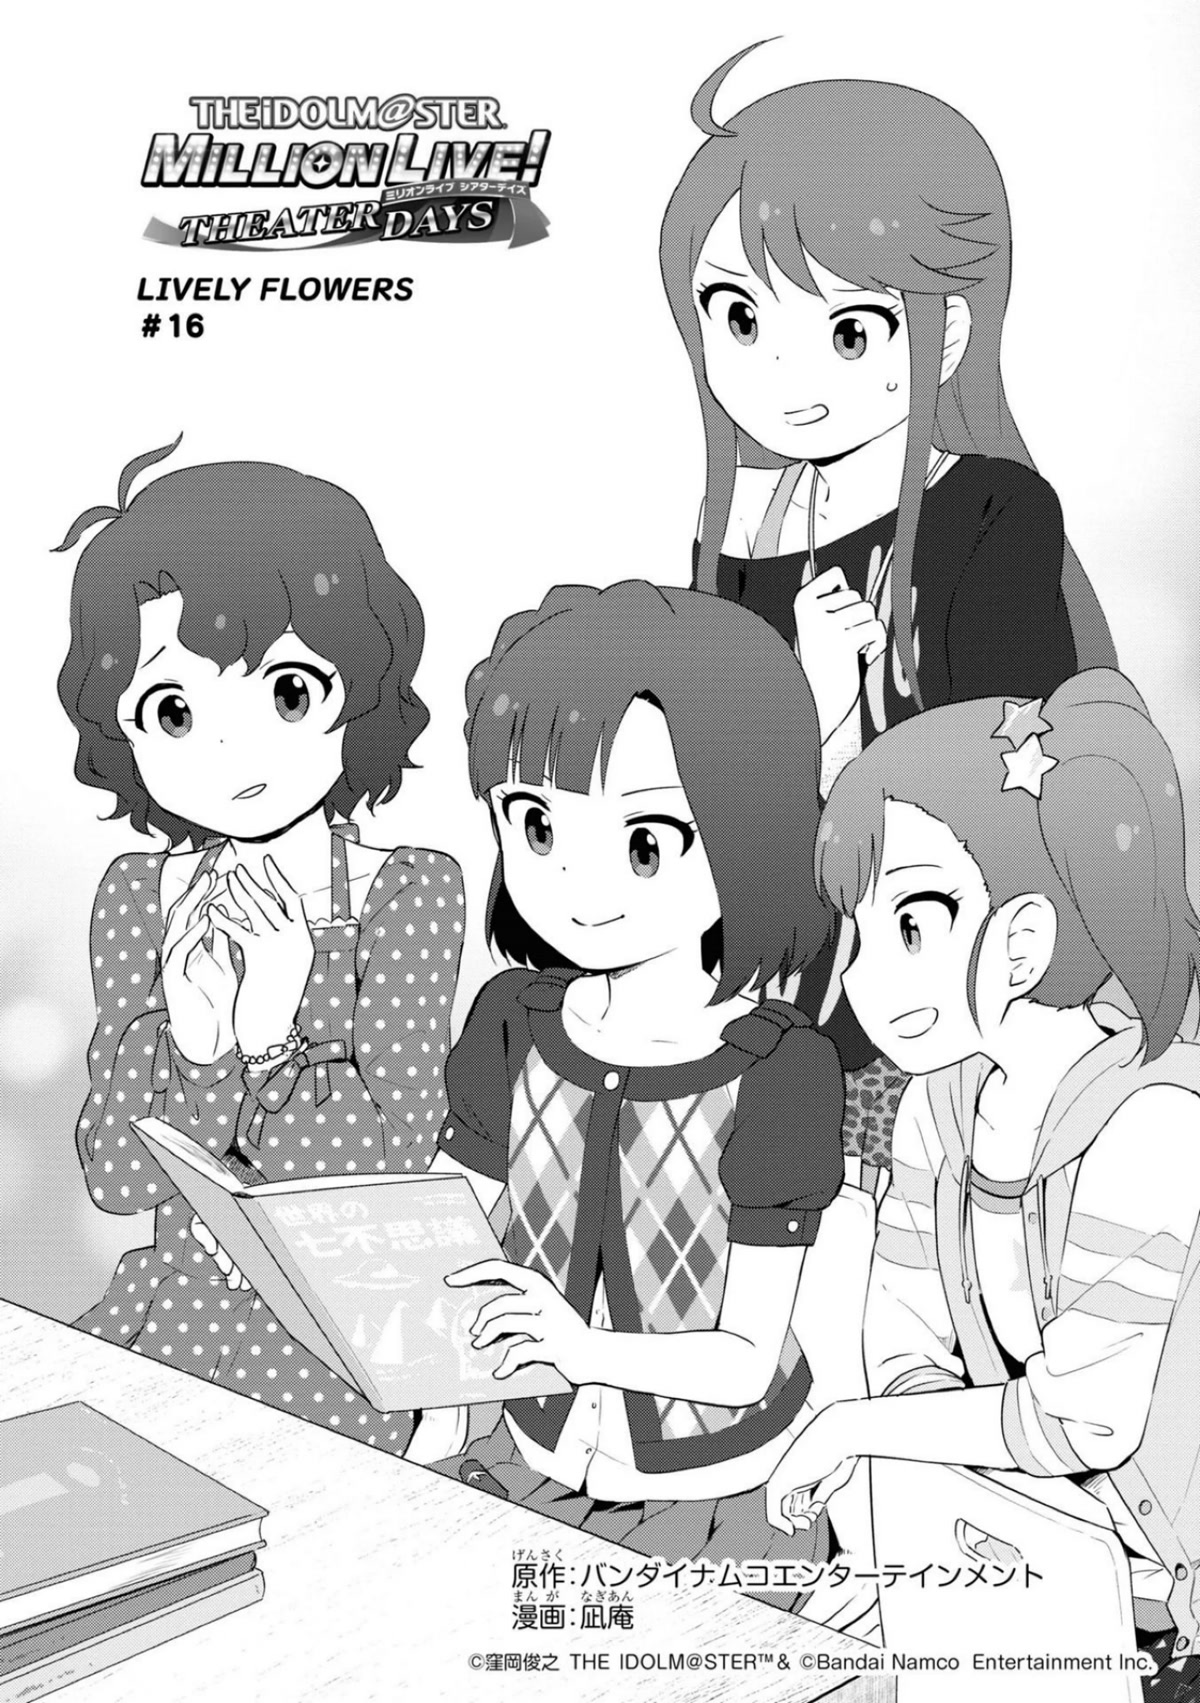 The Idolm@ster Million Live! Theater Days - Lively Flowers Chapter 16 #1